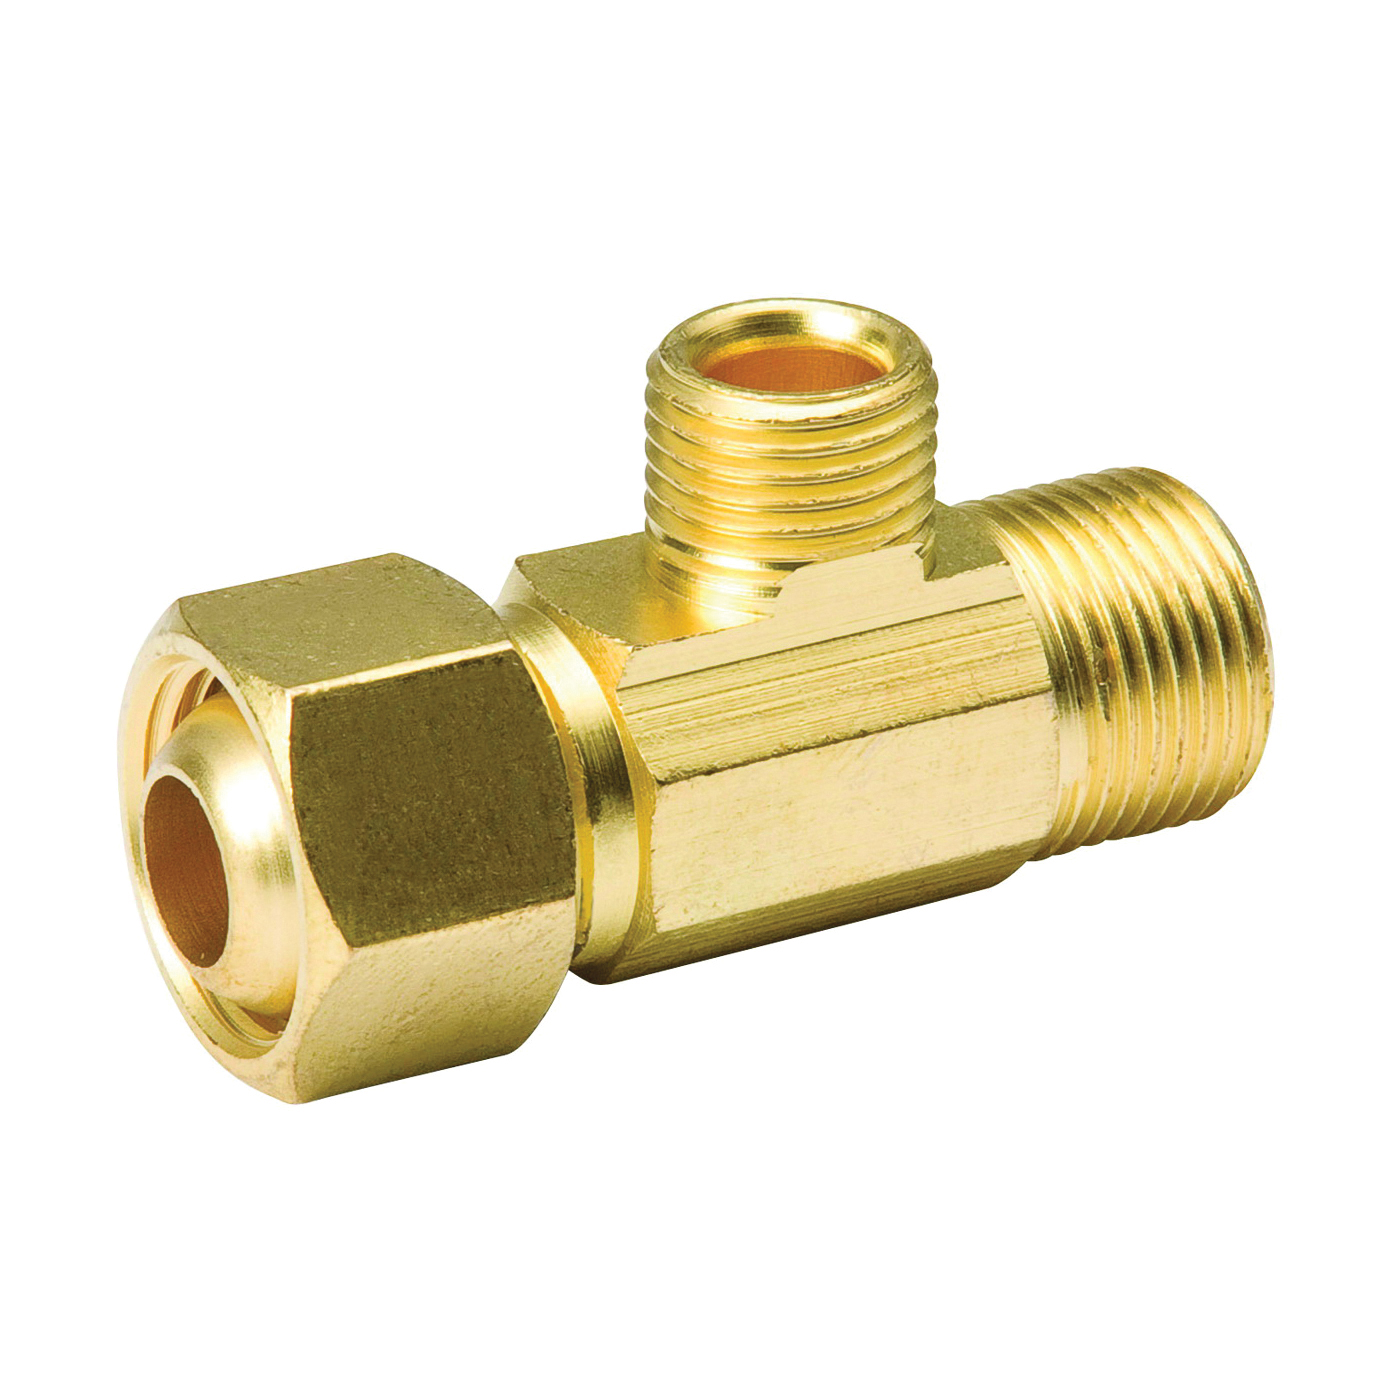 ProLine Series 993-016NL Adapter, 3/8 in, Compression, Brass